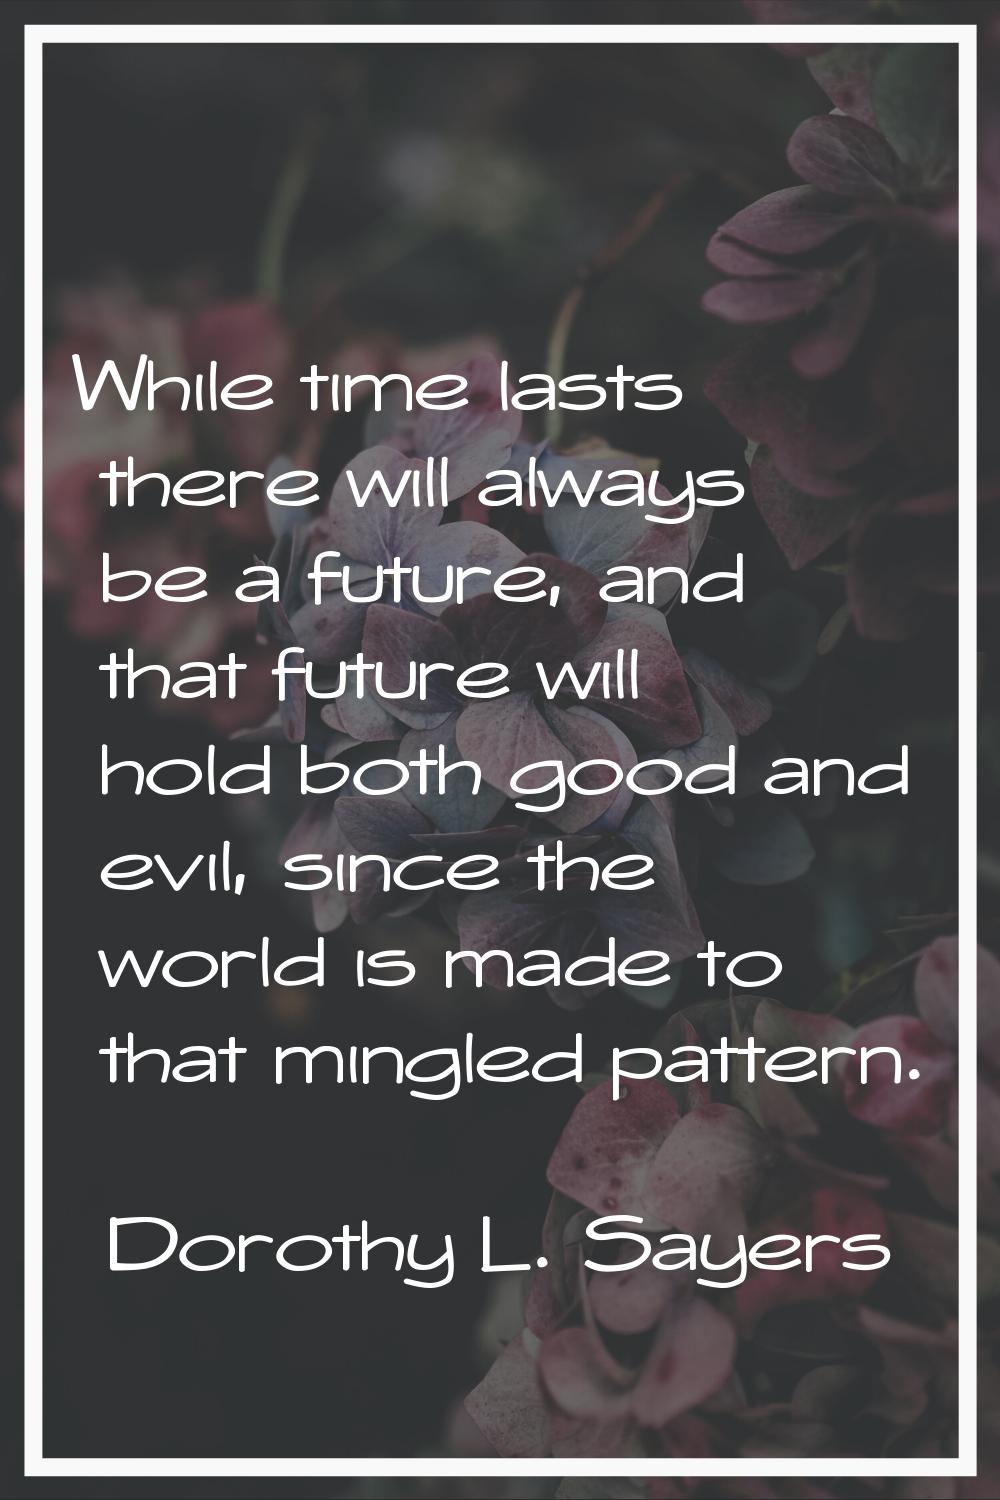 While time lasts there will always be a future, and that future will hold both good and evil, since